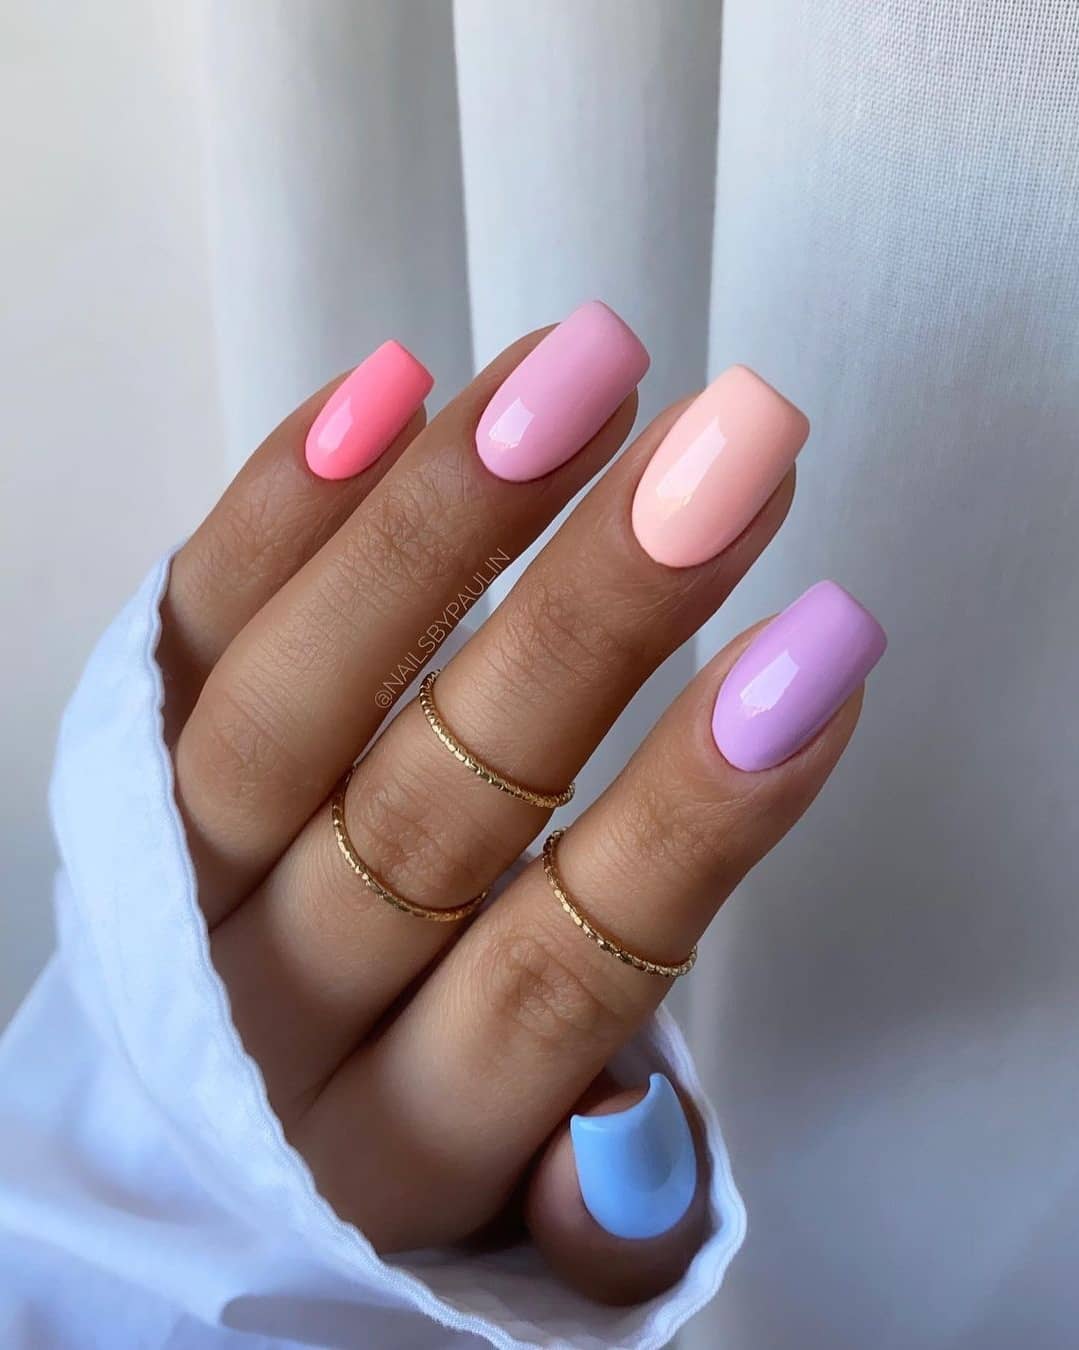 25 Trending Summer Nail Colors And Designs For 2021 images 20